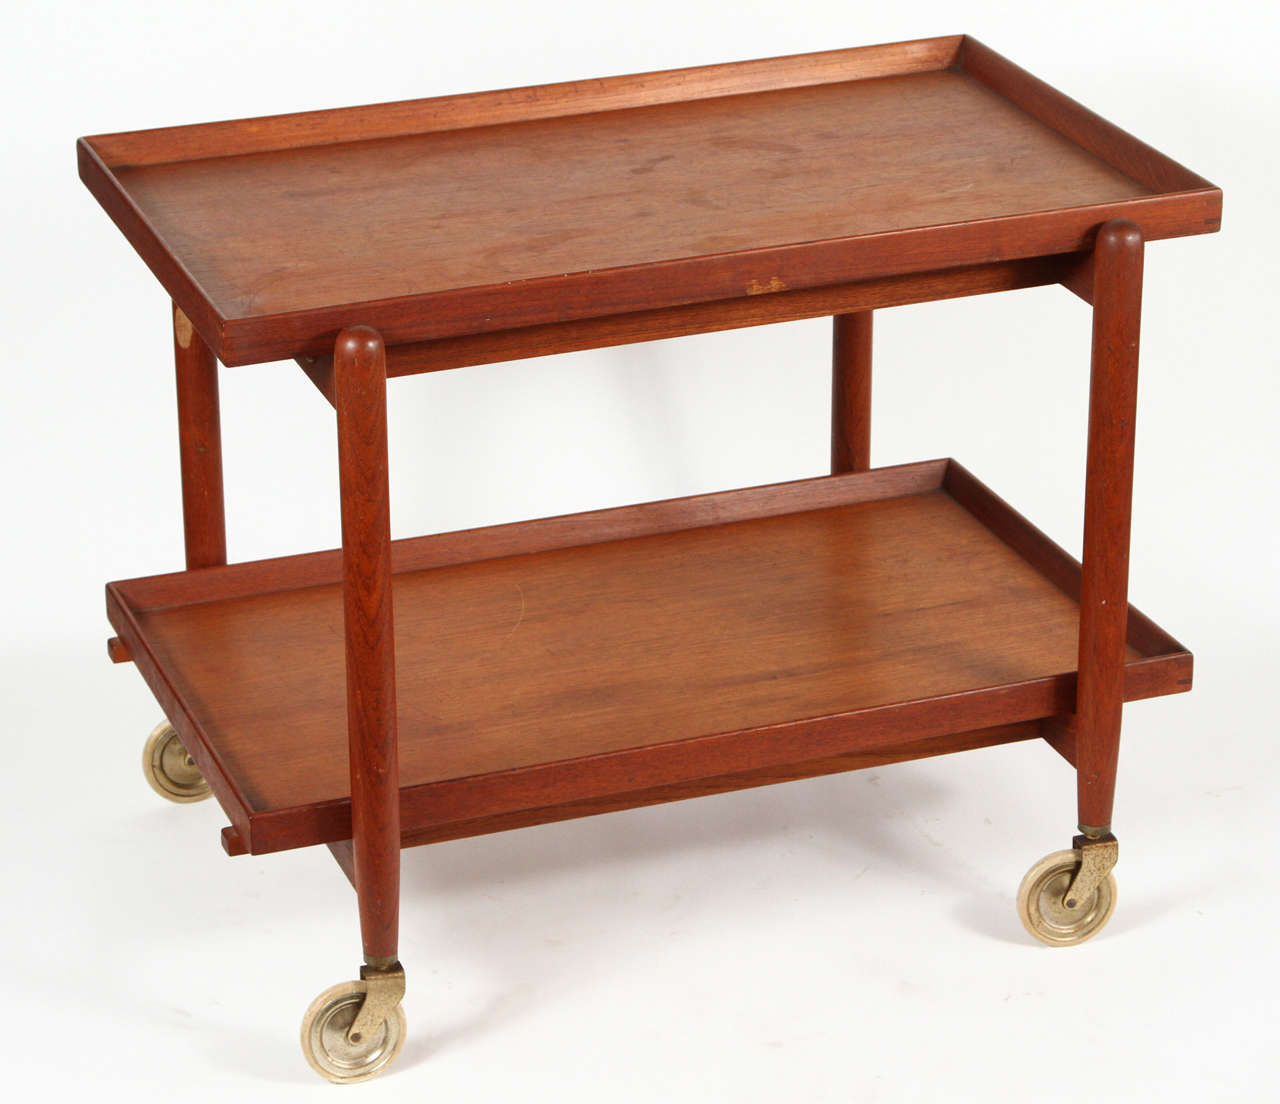 Teak rolling cart by Poul Hundevad. Top opens to accommodate two shelves side by side, doubling as a functional server. Made in Denmark circa 1960s.